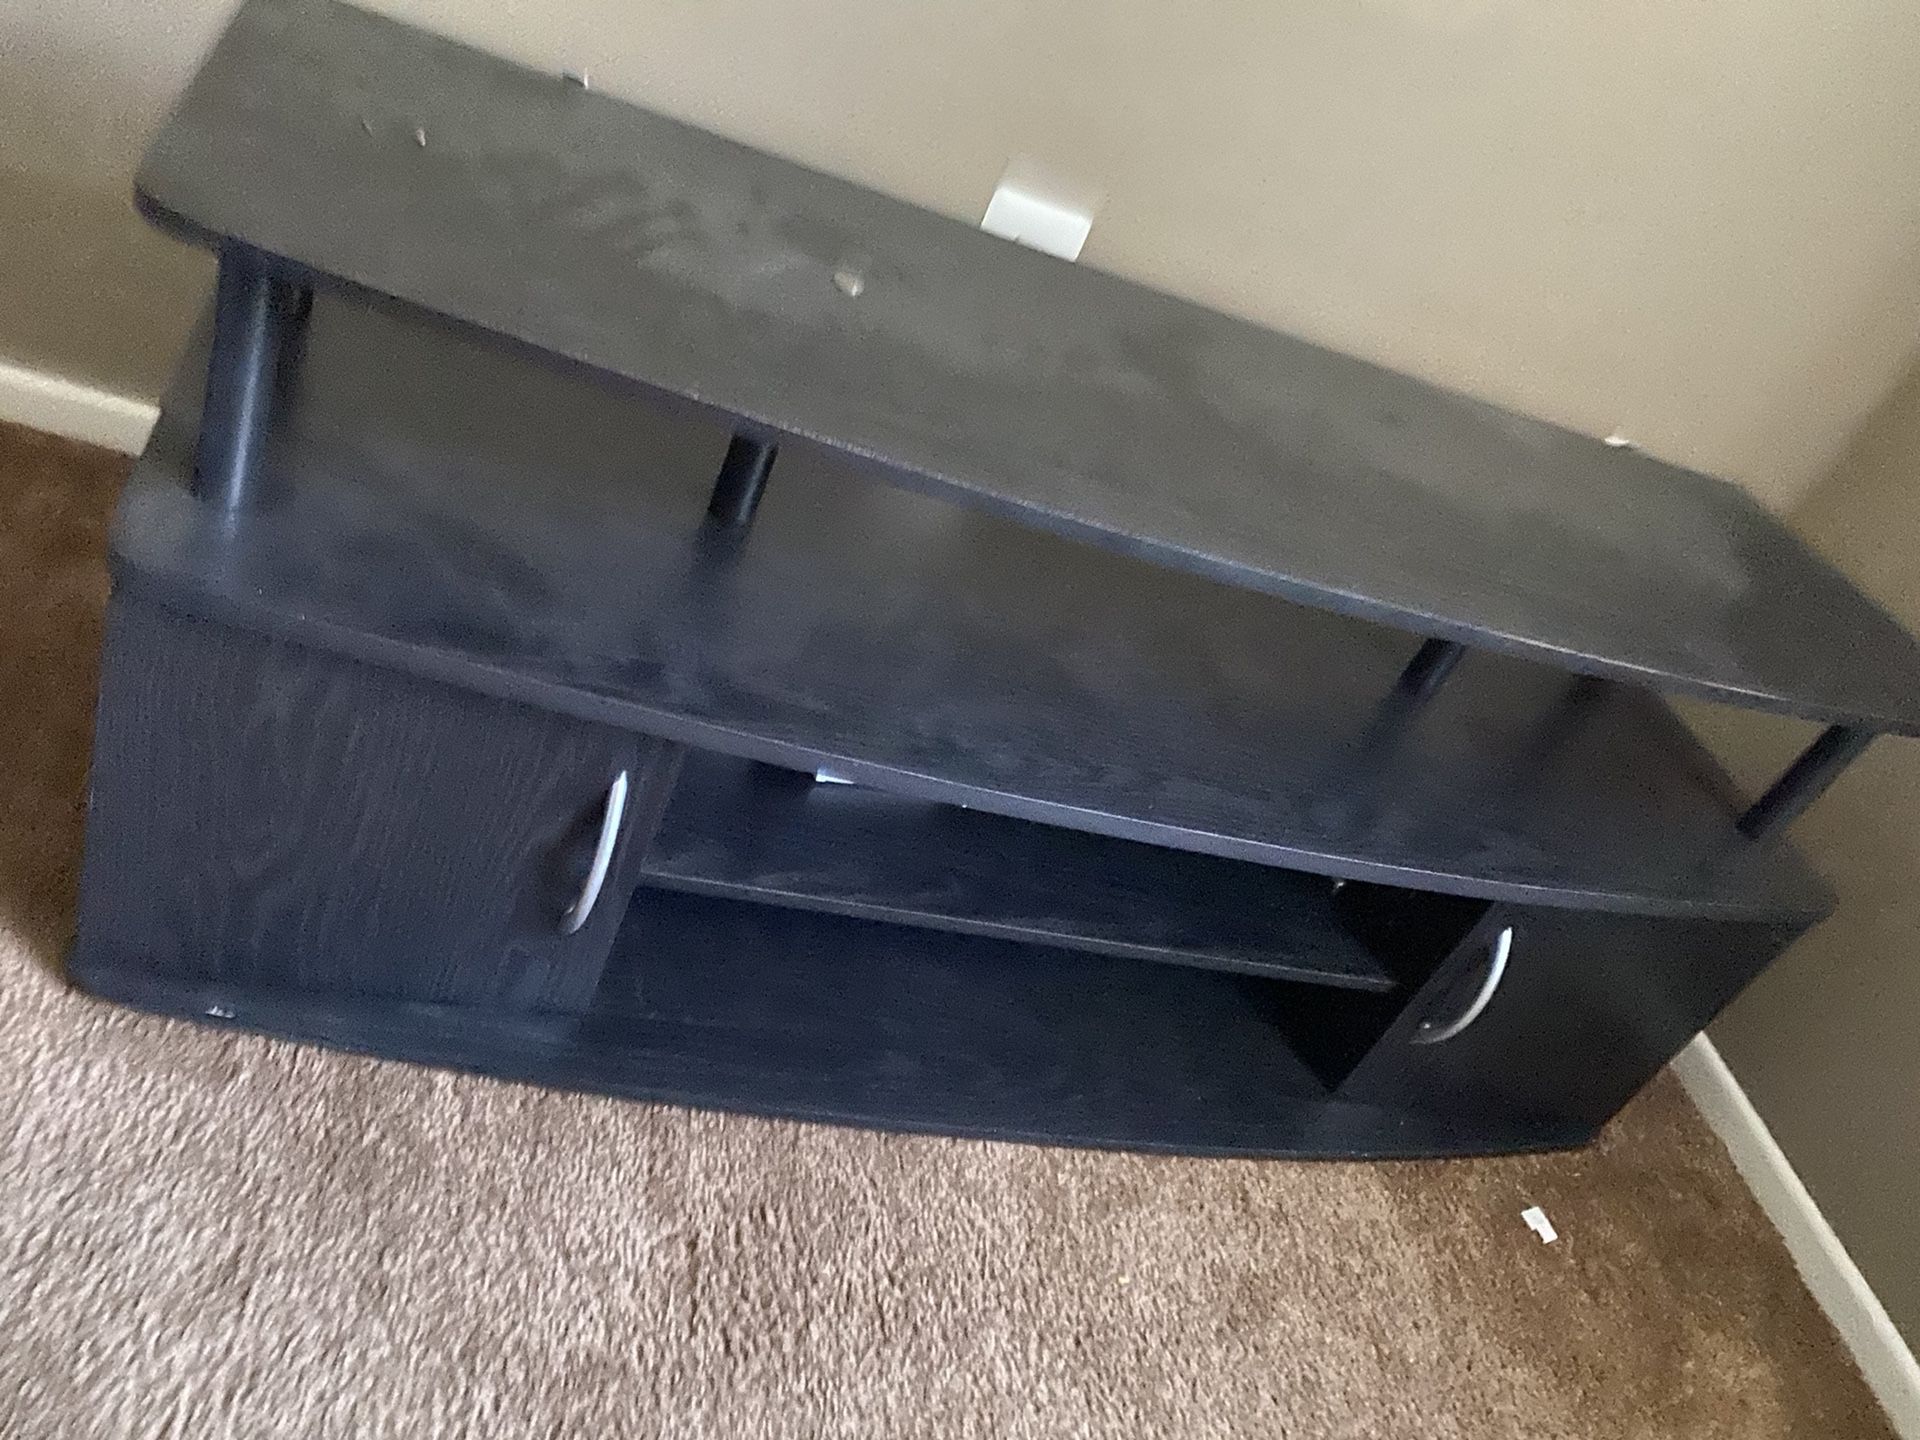 50 Inches TV stand for $40 negotiable